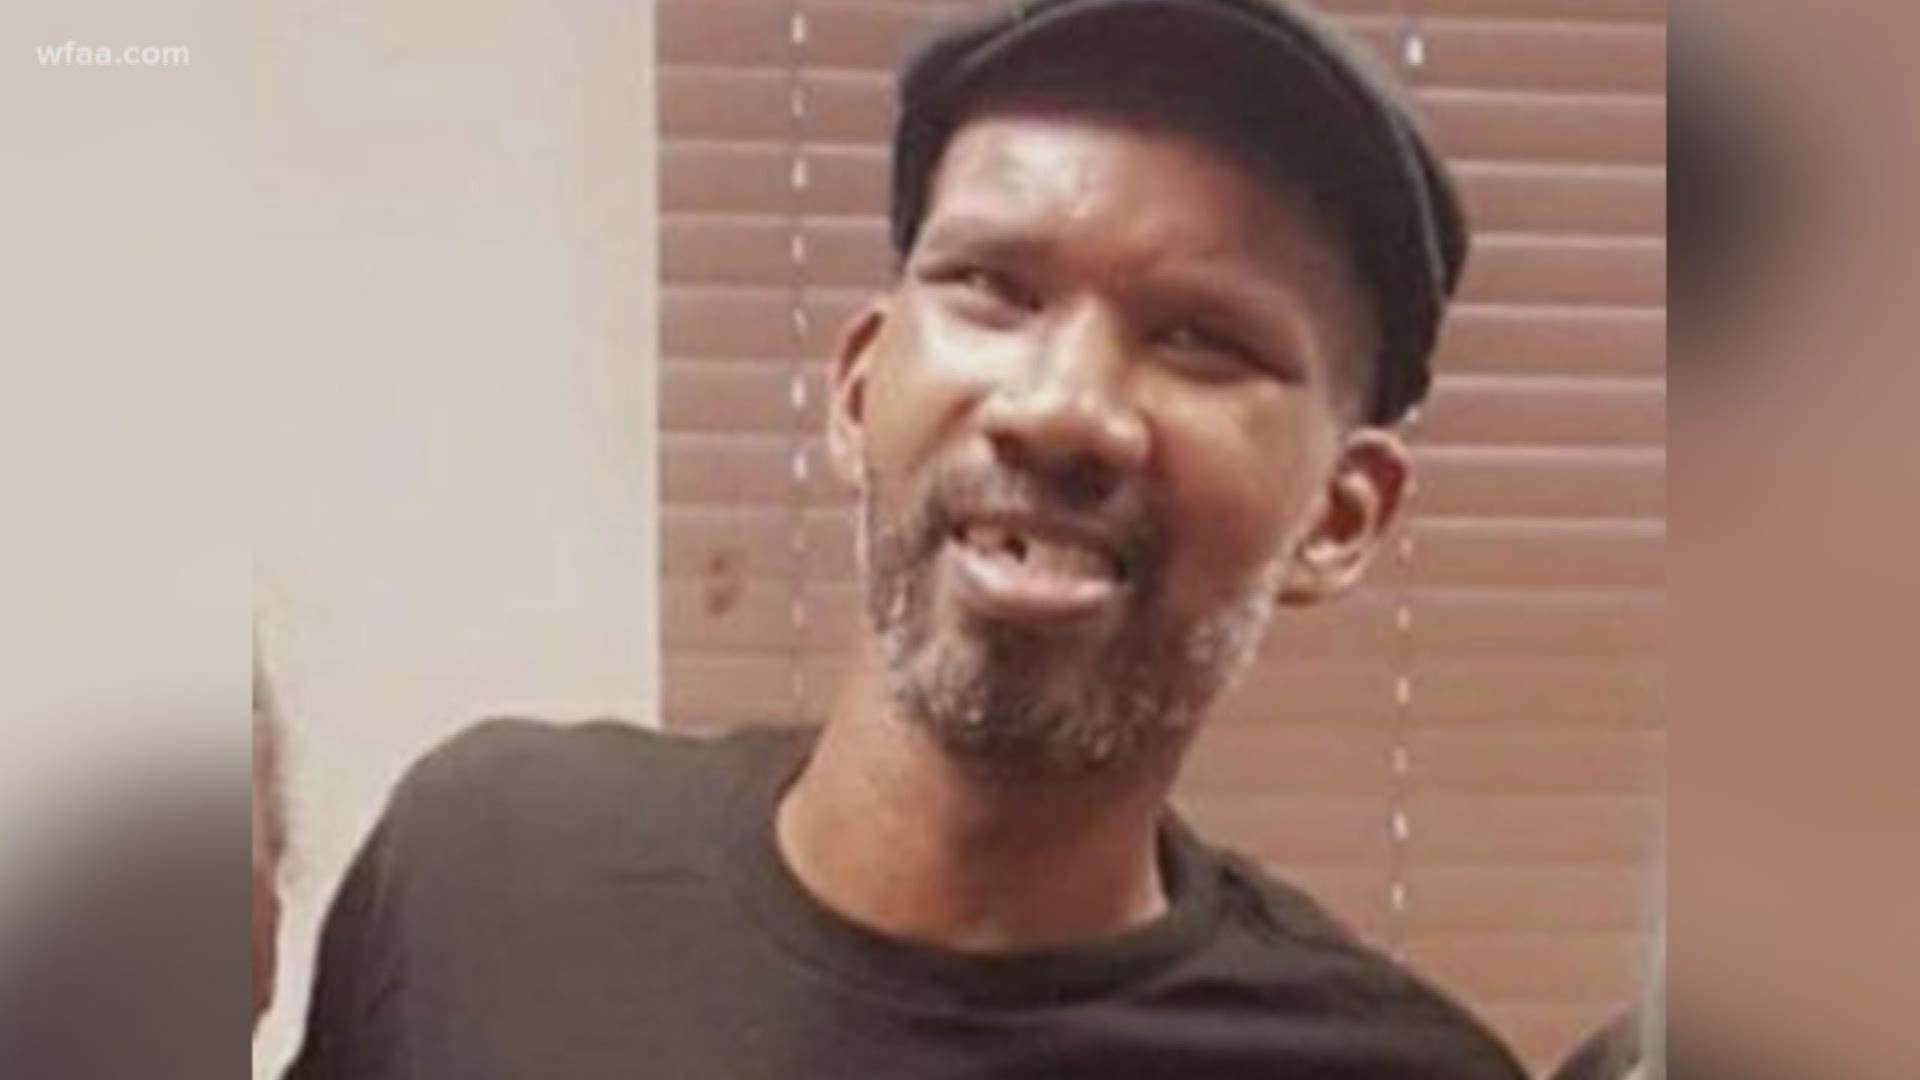 LeCarvin DeKevin Lewis was found dead at the Denton State Supported Living Center where he lived.